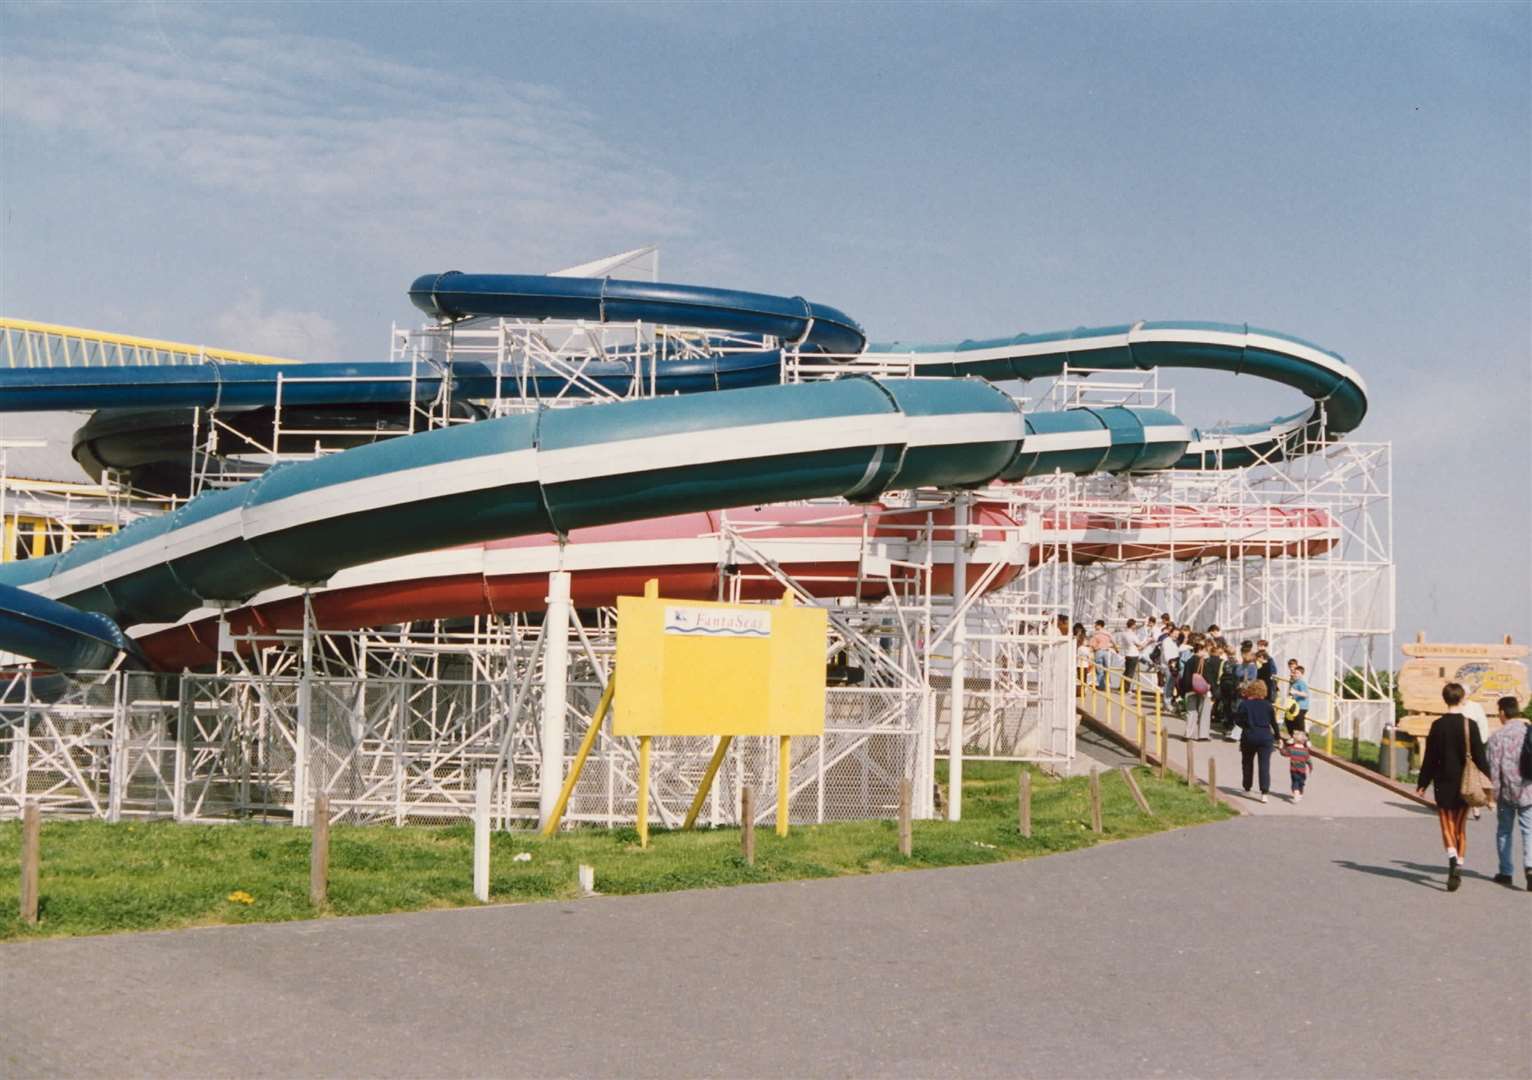 Fantaseas in Dartford was a popular attraction during the 1980s and early 1990s